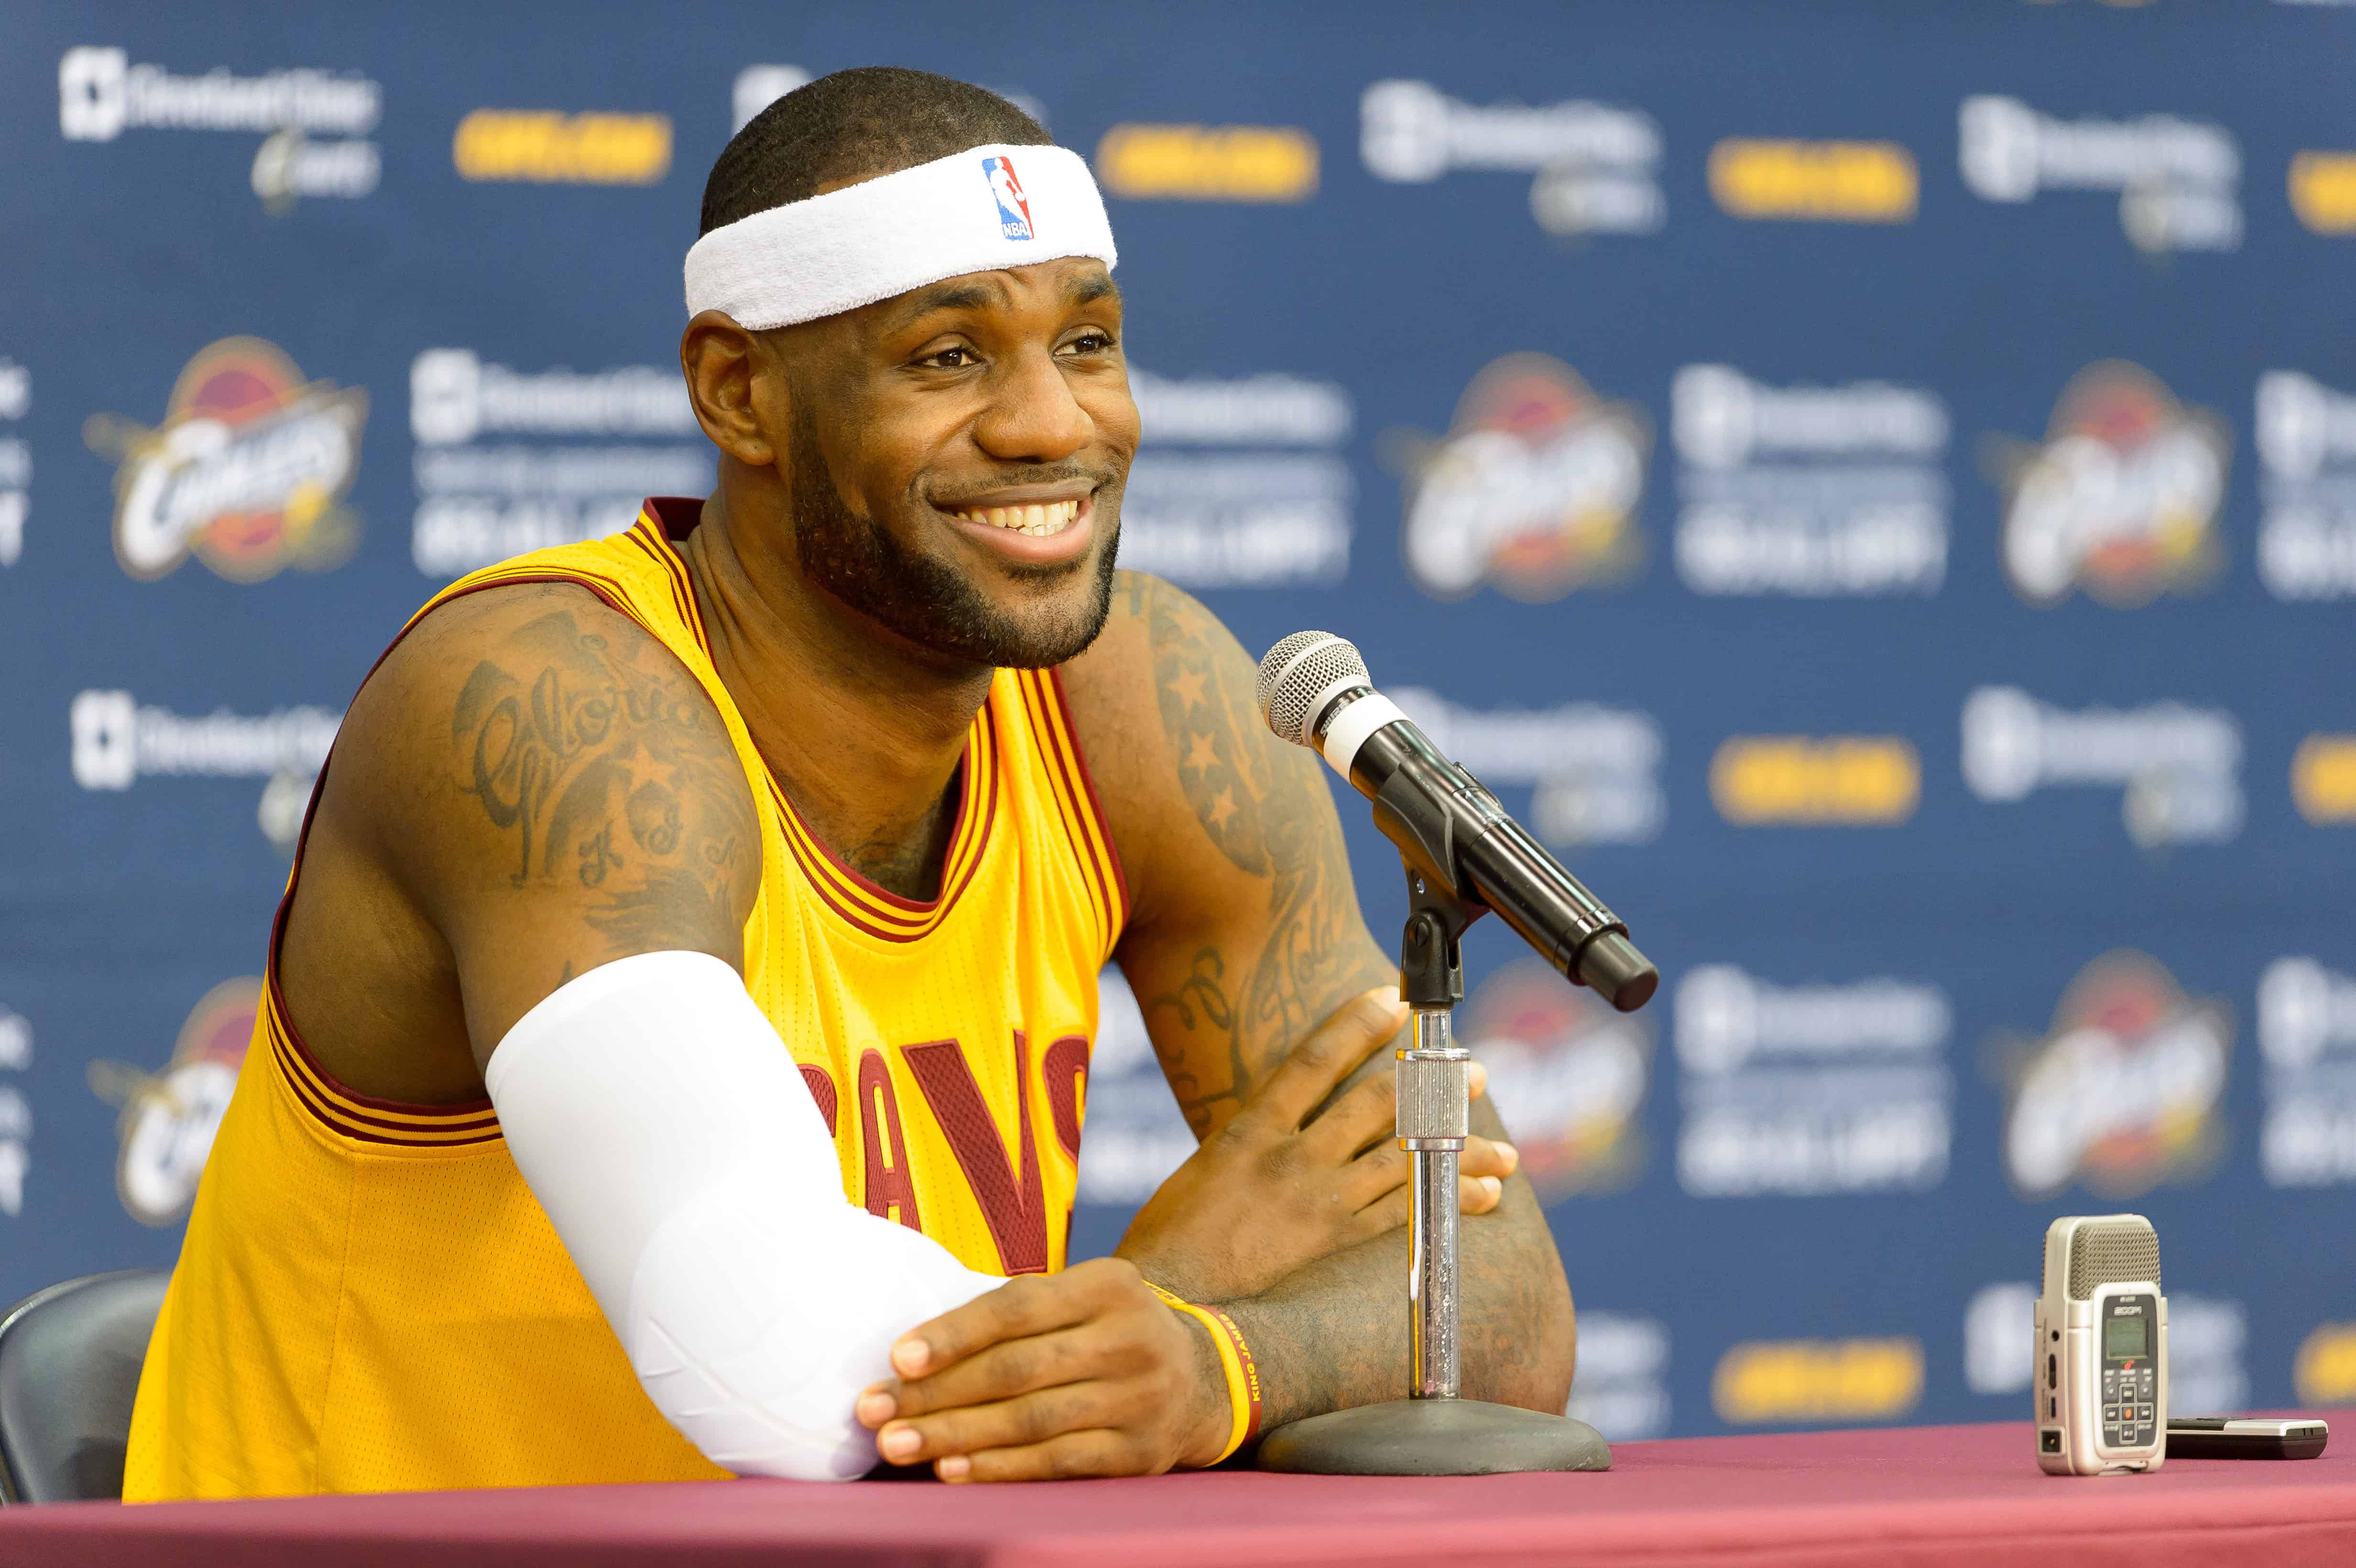 LeBron James says he still has a lot to prove in his return to